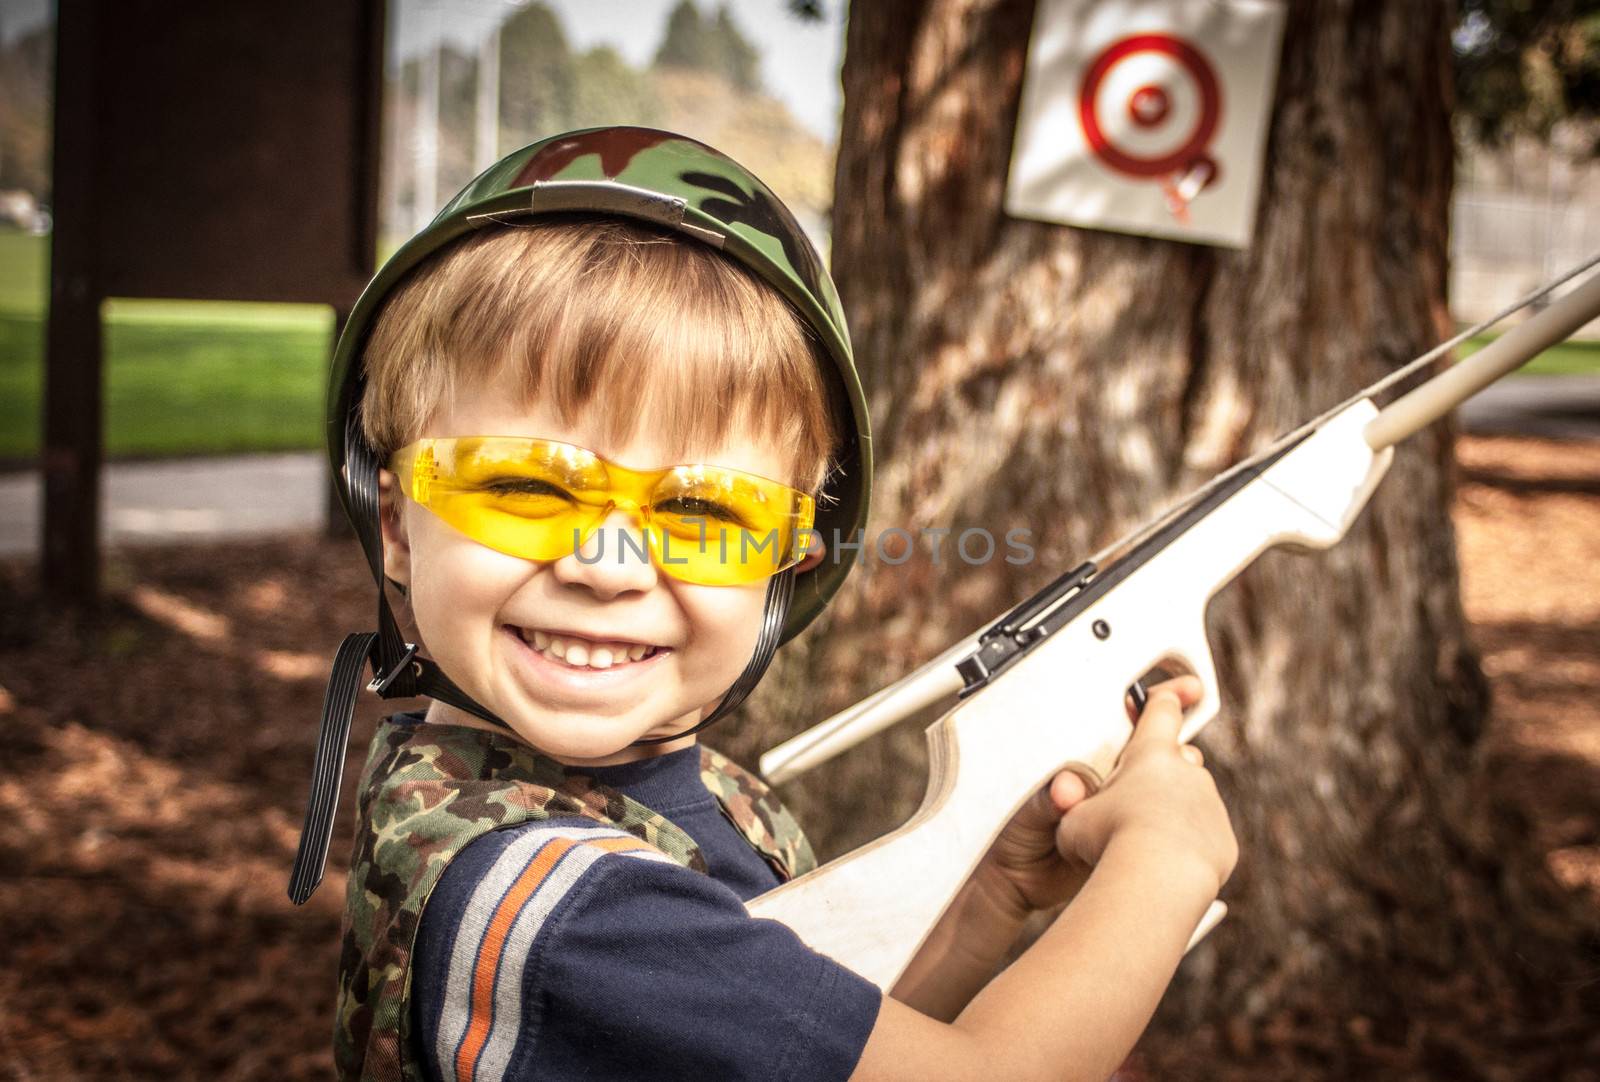 Boy playing with toy crossbow gun by 805promo